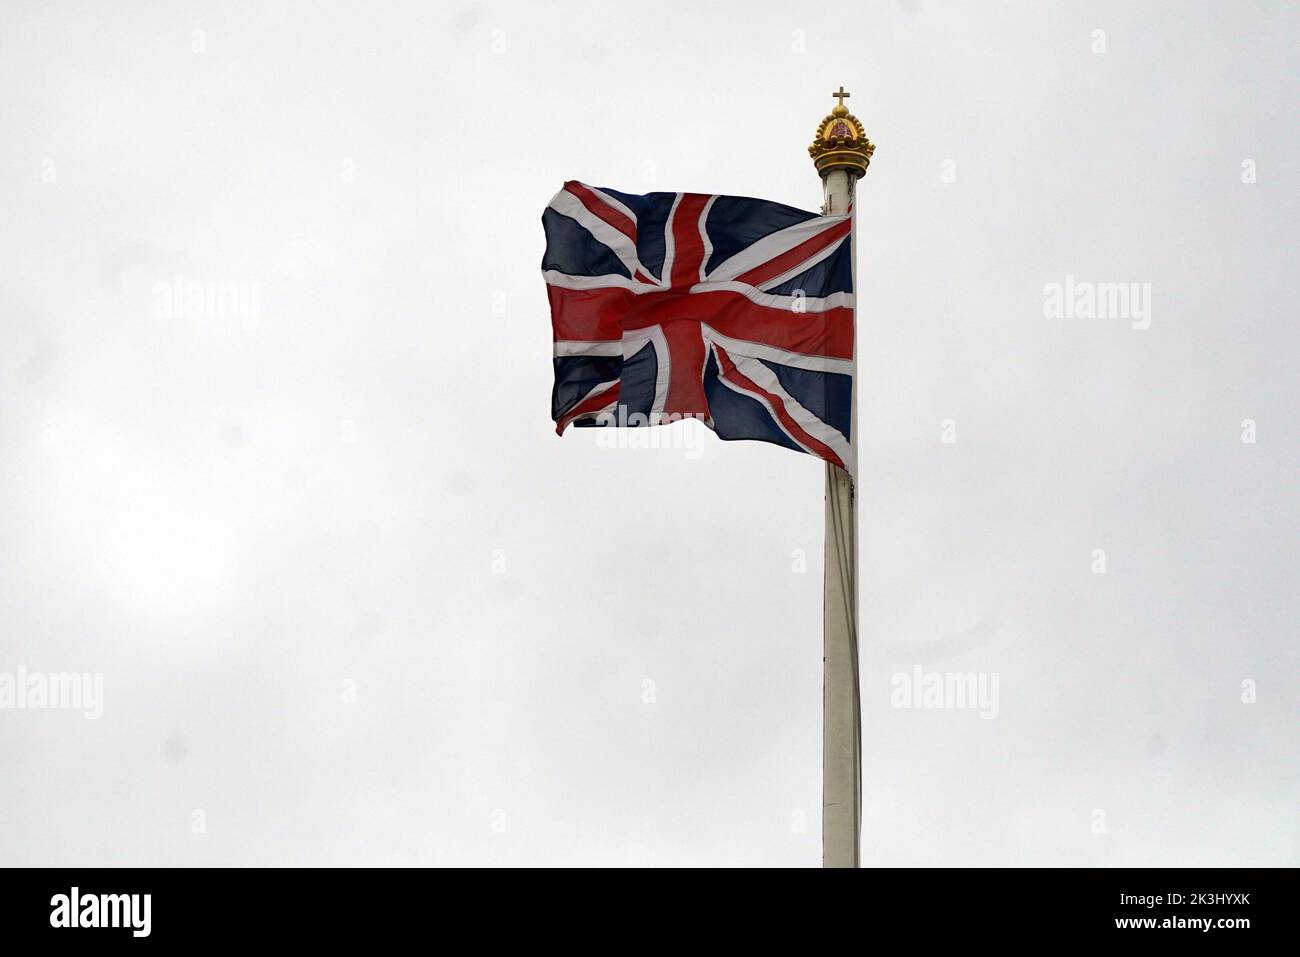 The Union flag over Buckingham Palace, London, is returned to full-mast as the mourning period following the death of Queen Elizabeth II comes to an end. Flags at royal residences had remained at half-mast since the Queen died on September 8. Picture date: Tuesday September 27, 2022. Stock Photo